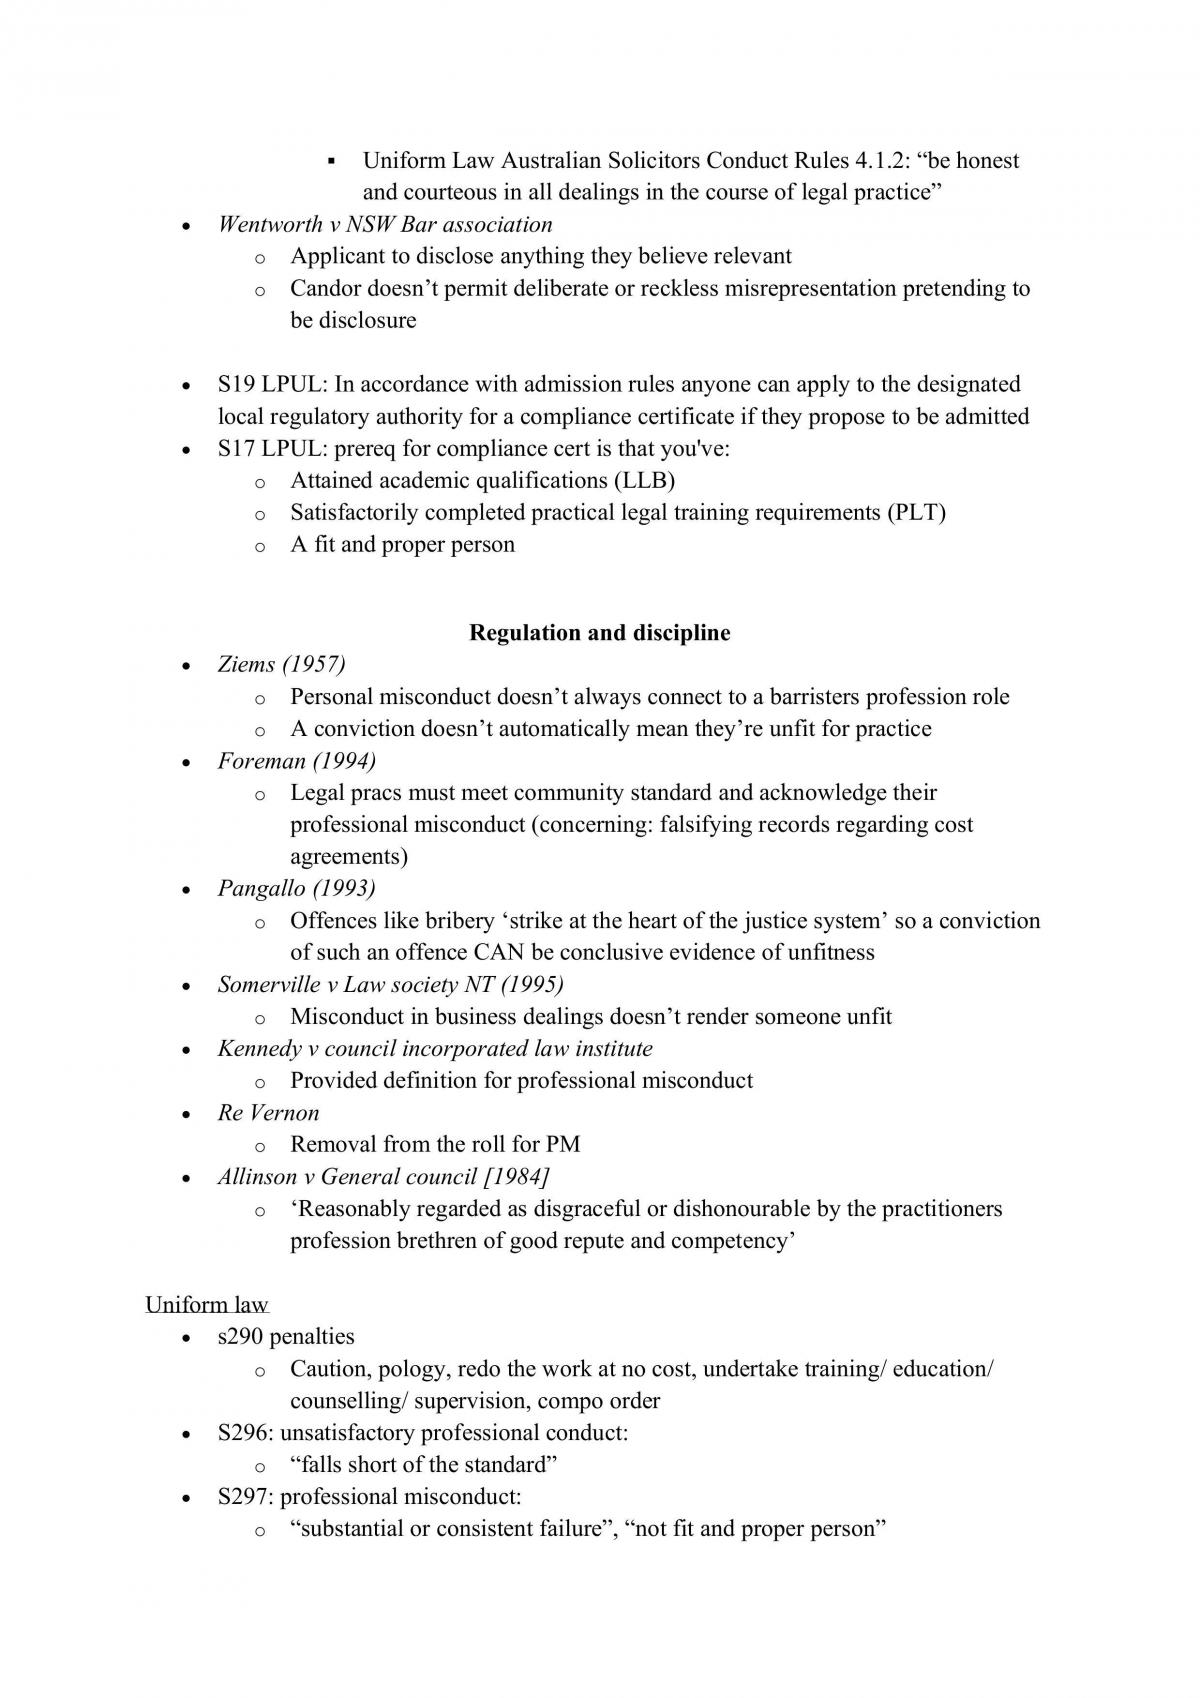 LLB1197 Full Exam Notes - Page 3